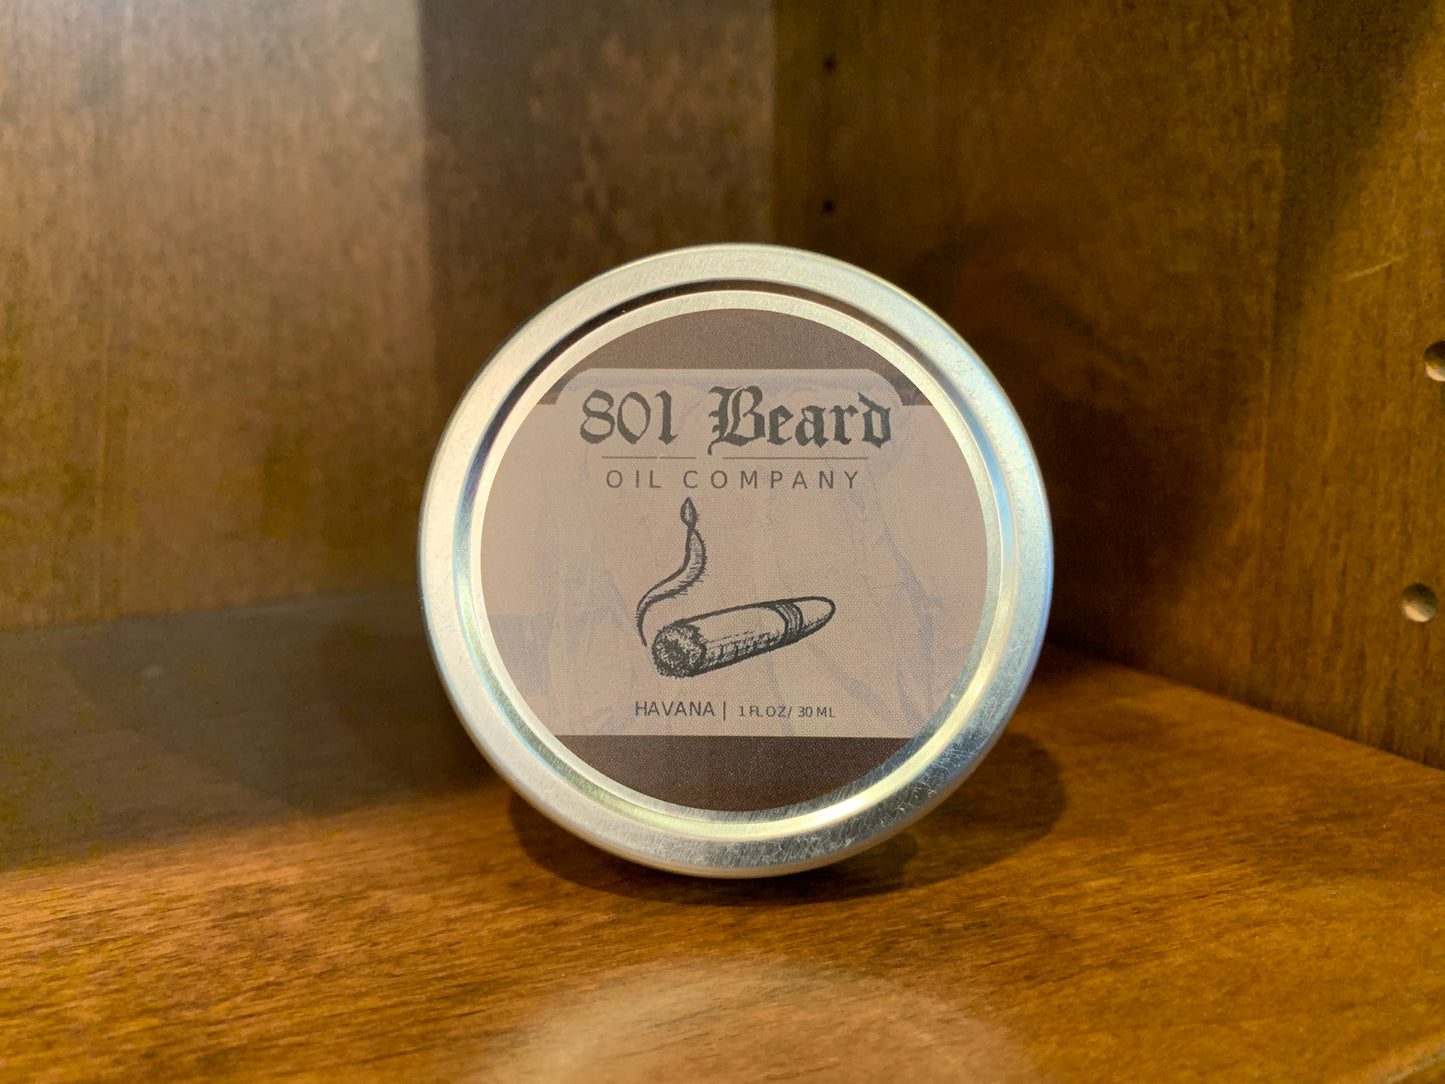 This 801 Beard Balm has a more dense formula than regular balms, while still being creamy. This balm gives the perfect balance providing both perfect texture and a better hold and control for more stubborn beards and mustaches. This Beard oil works marvels for the men who want a longer, fuller and healthier beard with scents that invigorate and excite. Sold at Mini Moustachery, the all-in-one mens care, grooming, and barber supply depot.